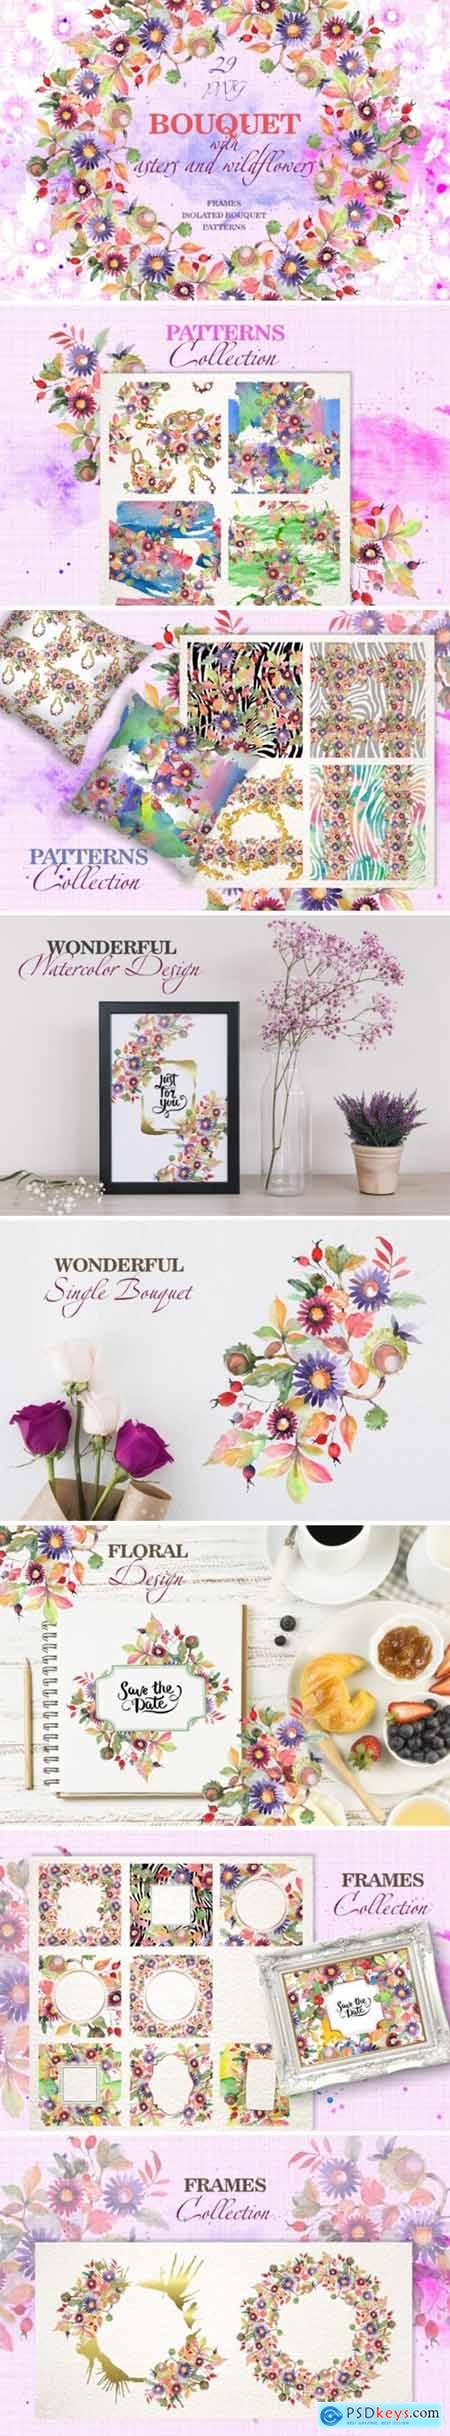 Flowers, Trees and Leaves » page 6 » Free Download Photoshop Vector ...